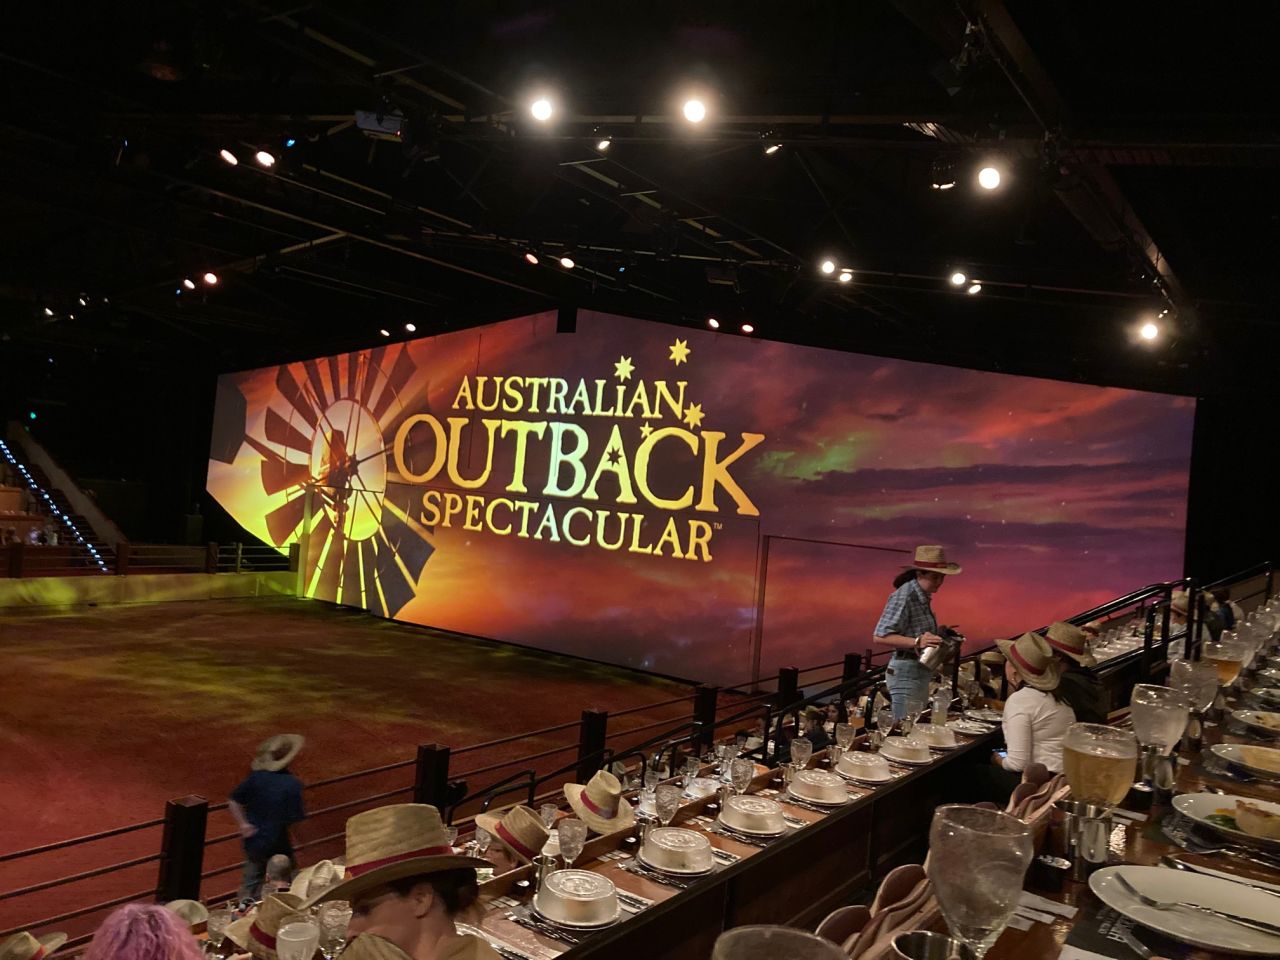 Members and guests enjoyed a matinee session of the Australian Outback Spectacular show in June 2022